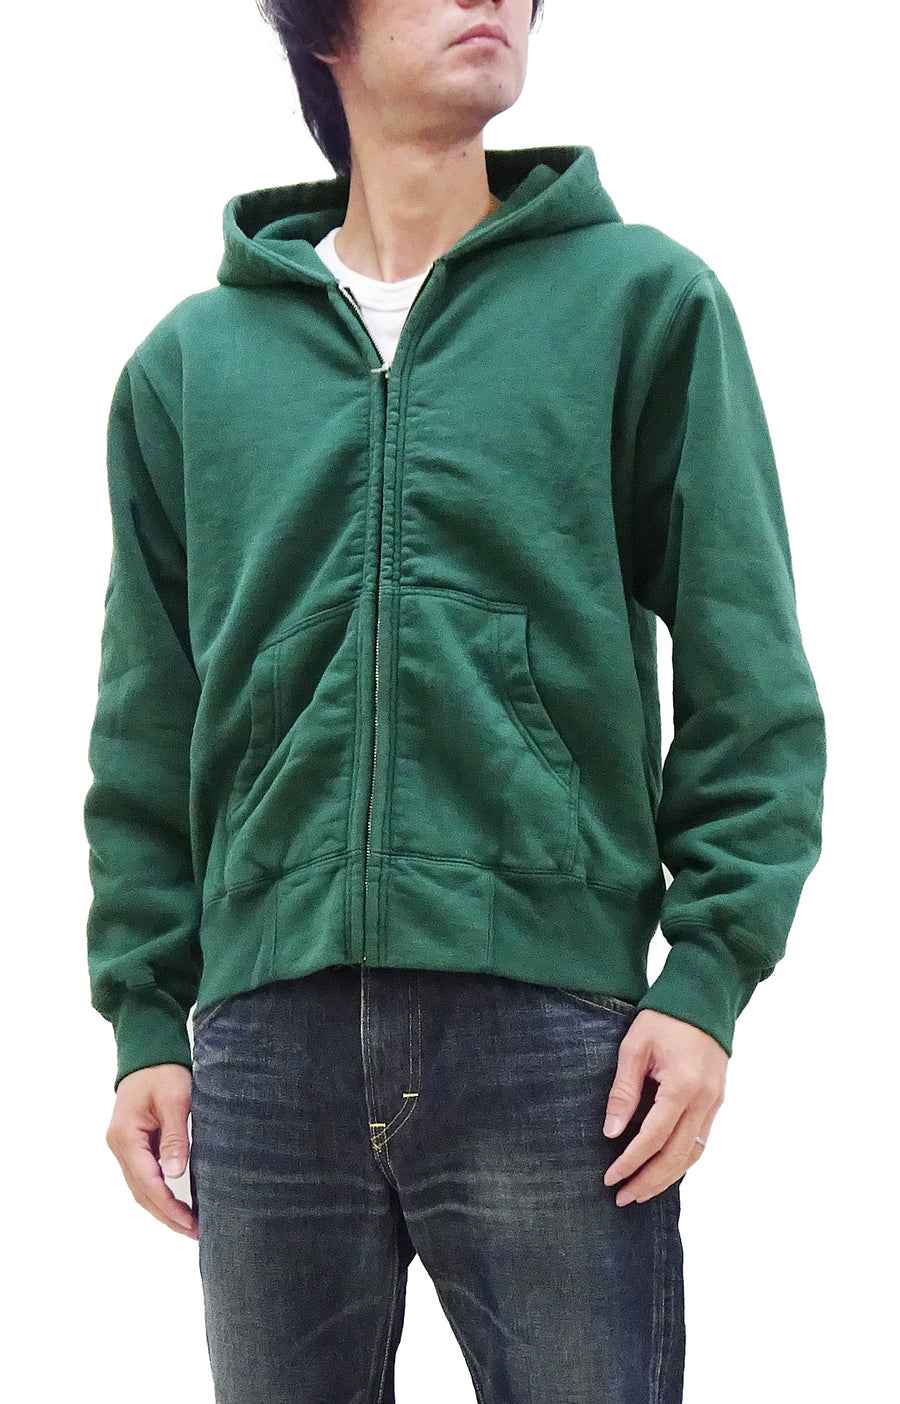 Full Sleeves Cotton Blend Mens Hoodie T Shirt, Hooded Collar at Rs